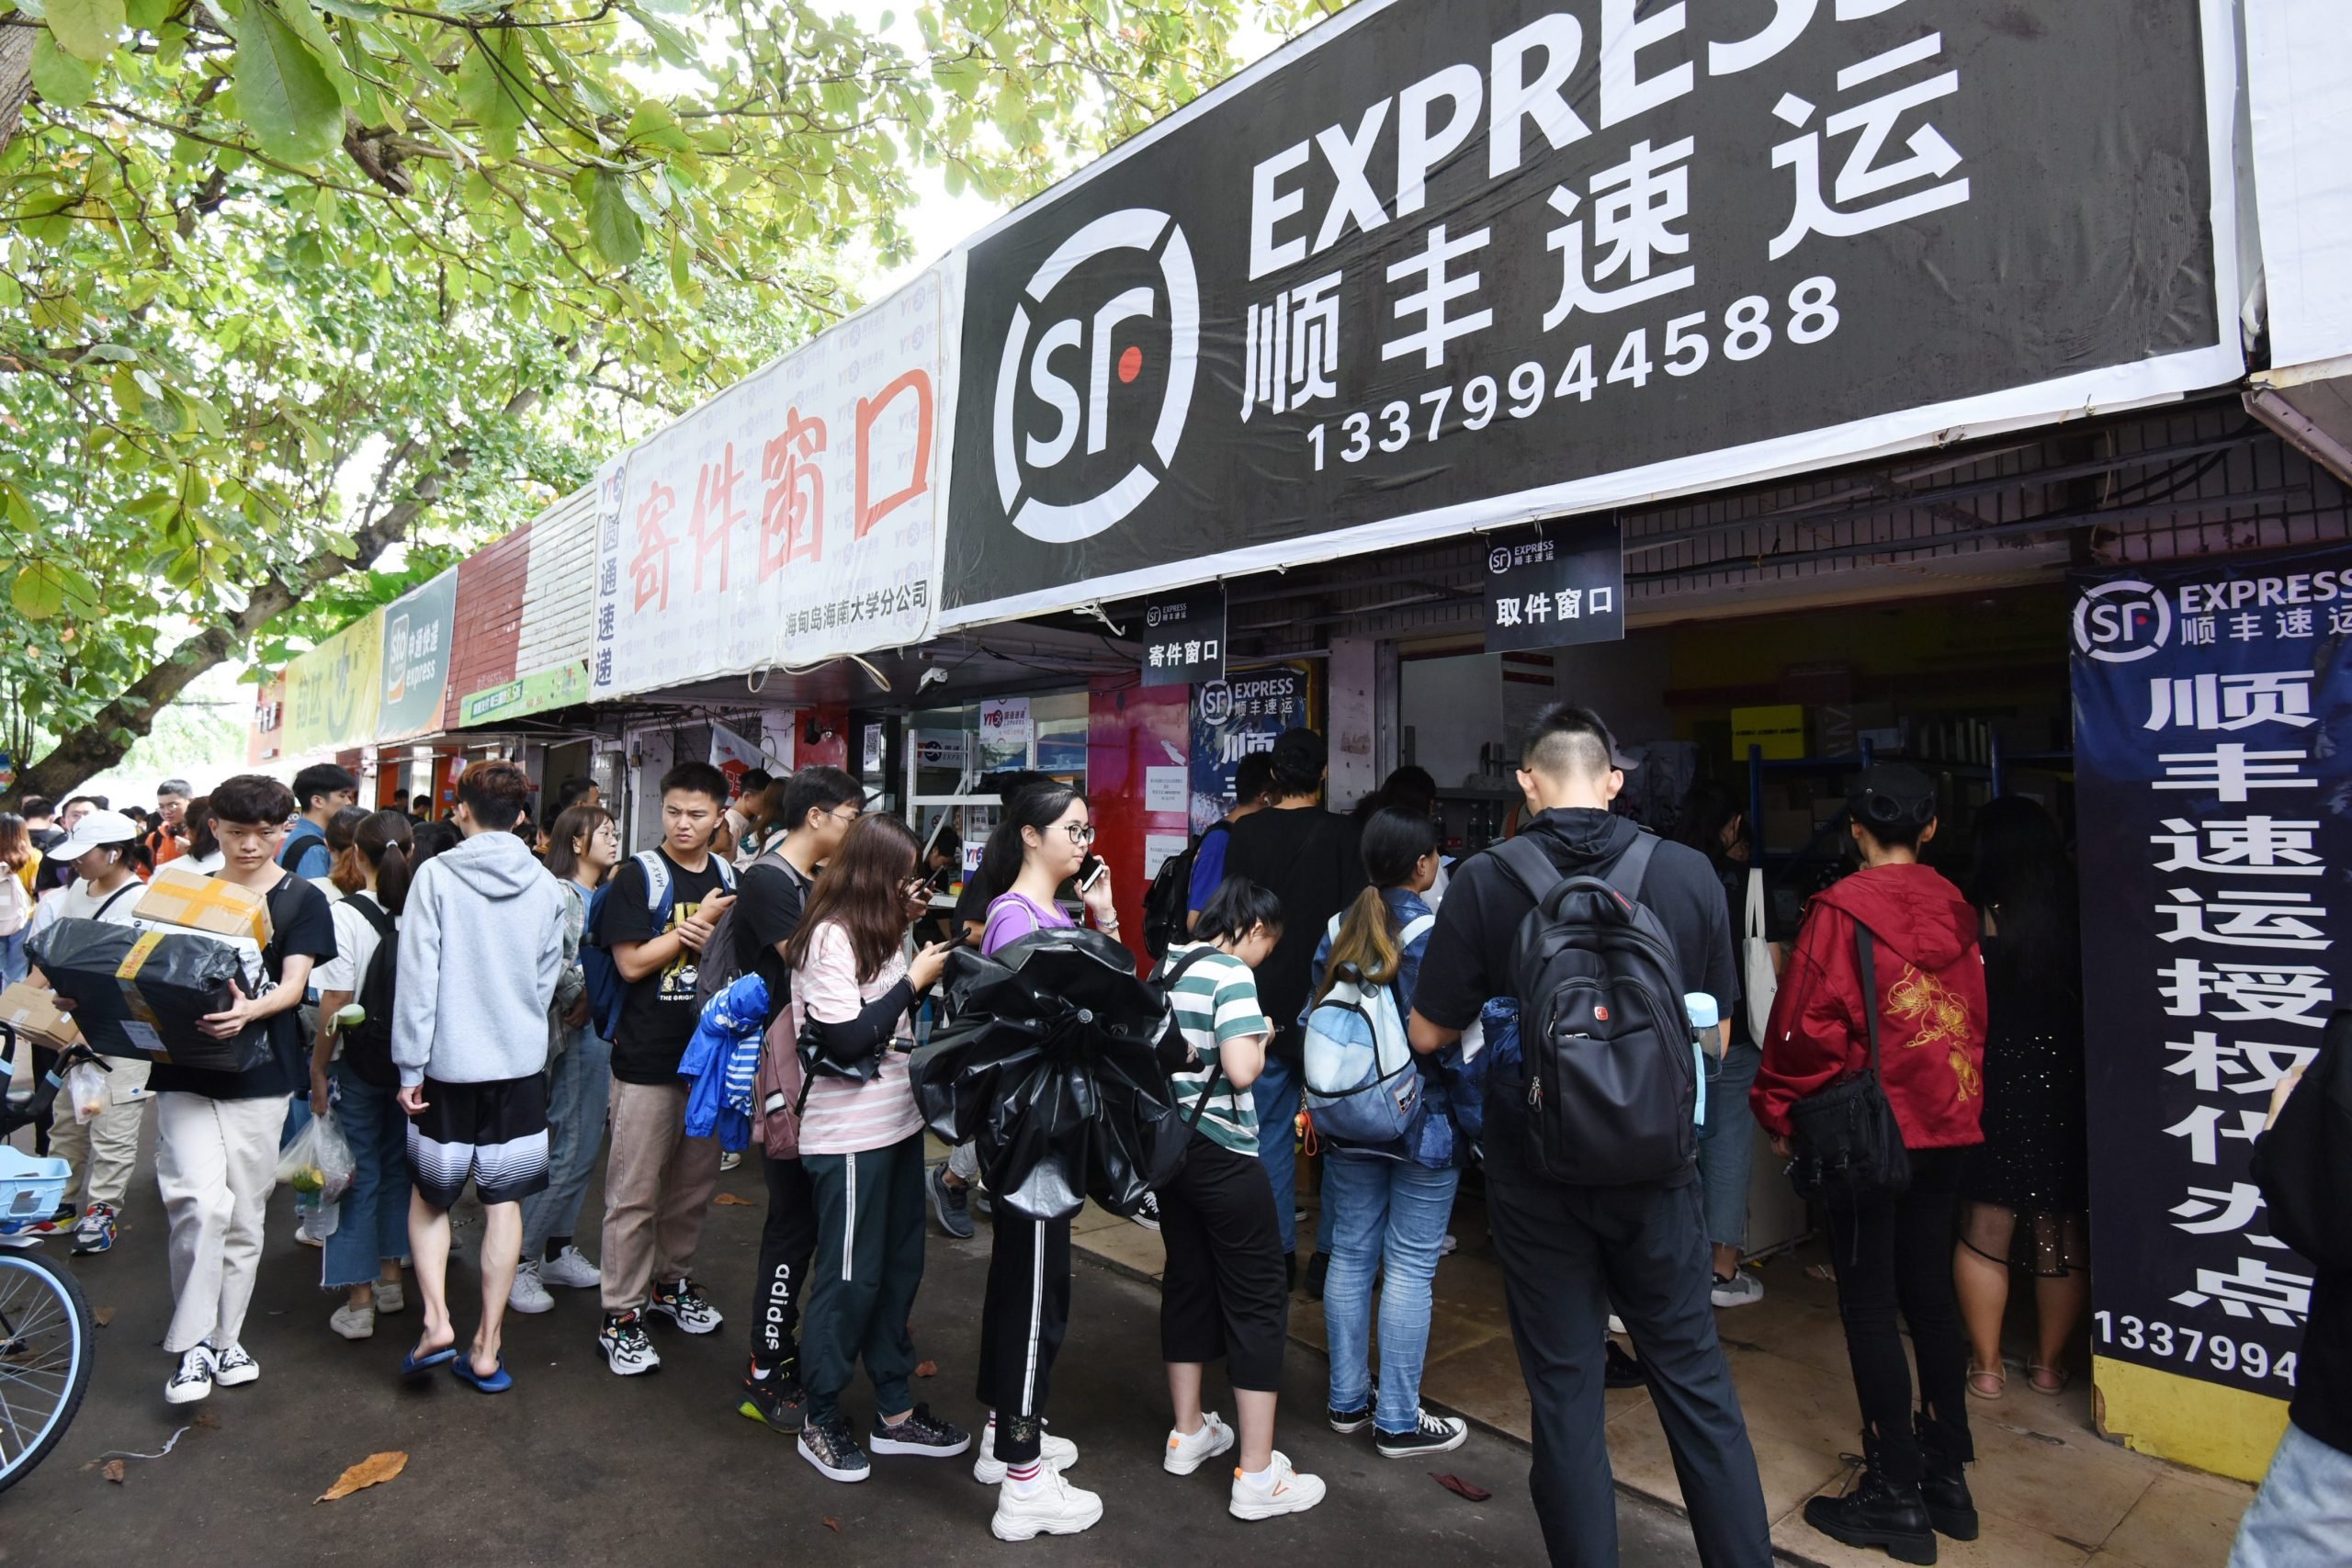 Students lining up for Singles' Day collection